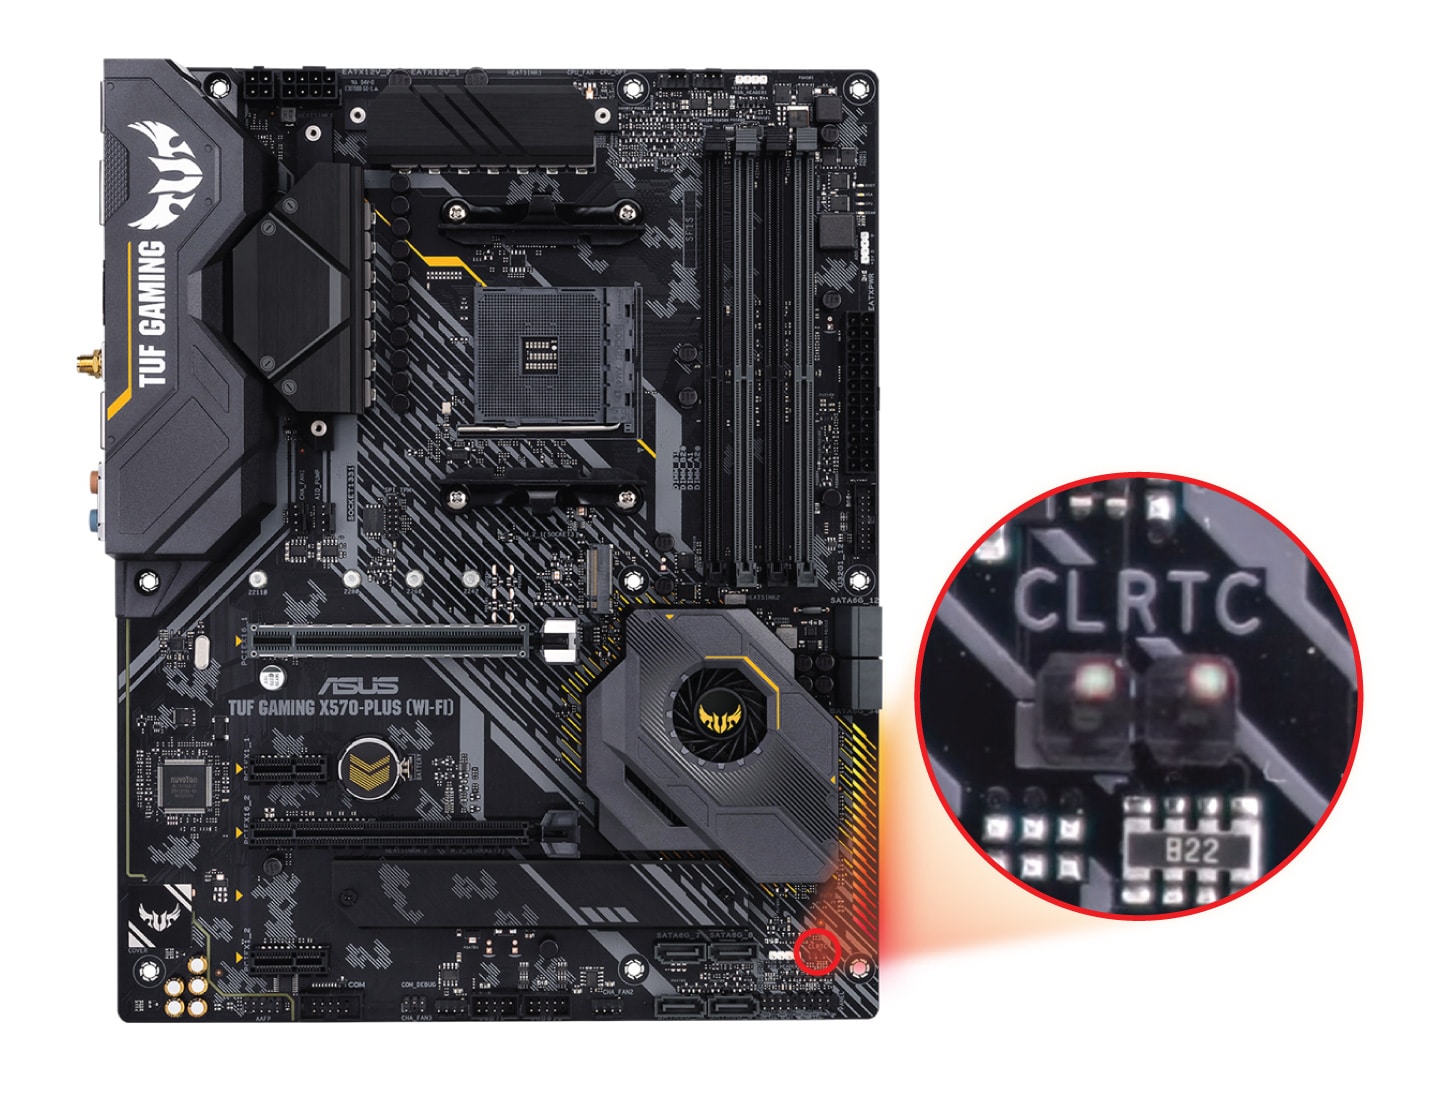 Showing CMOS jumper location on ASUS TUF GAMING X570-PLUS WI-FI motherboard.